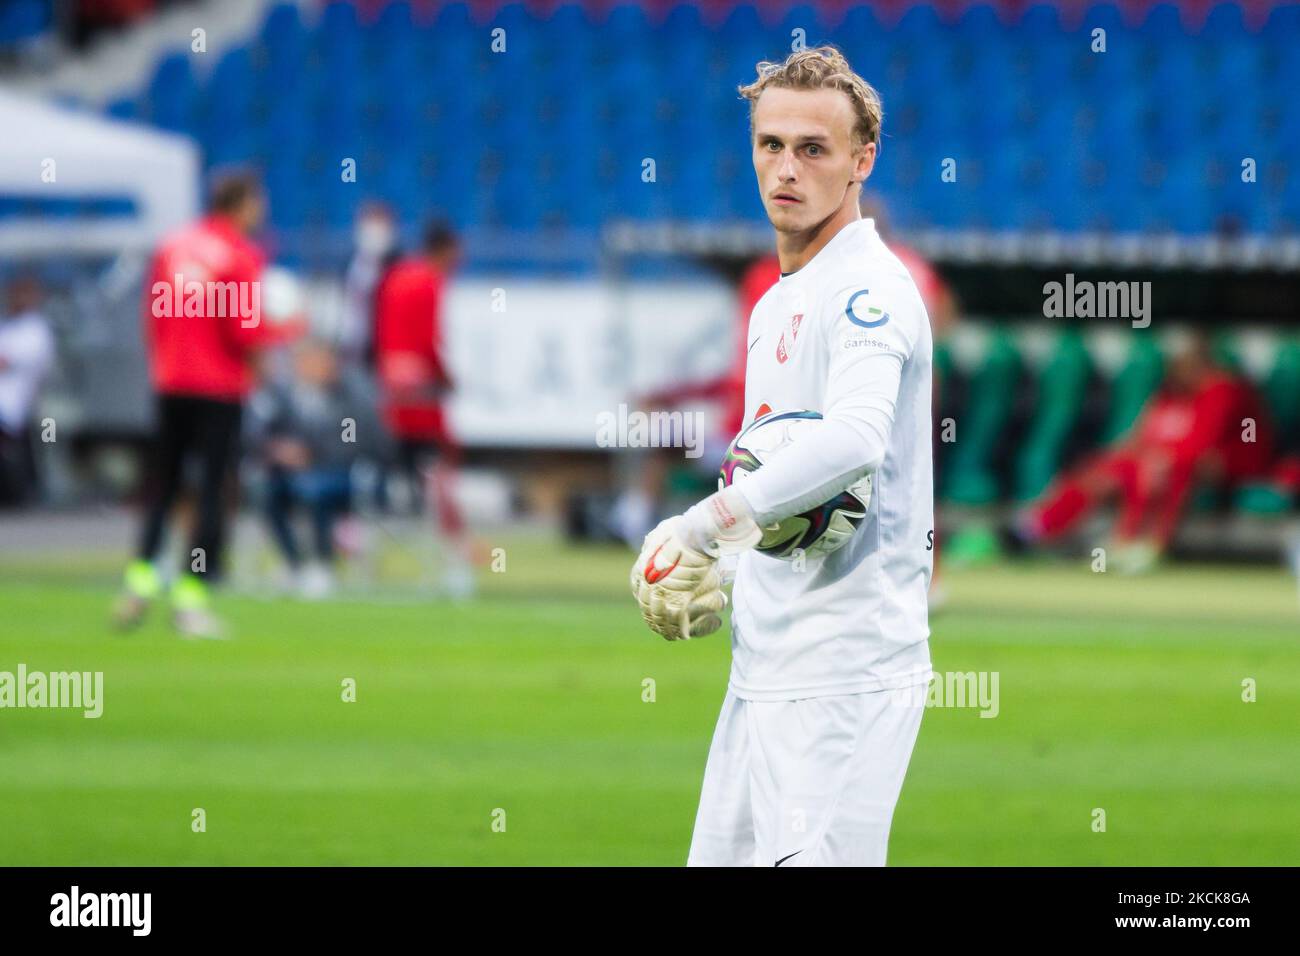 Goalkeeper Norman Quindt of havelse looks on during the 3. Liga match between TSV Havelse and Tuerkguecue Muenchen at HDI-Arena on August 25, 2021 in Hanover, Germany. (Photo by Peter Niedung/NurPhoto) Stock Photo